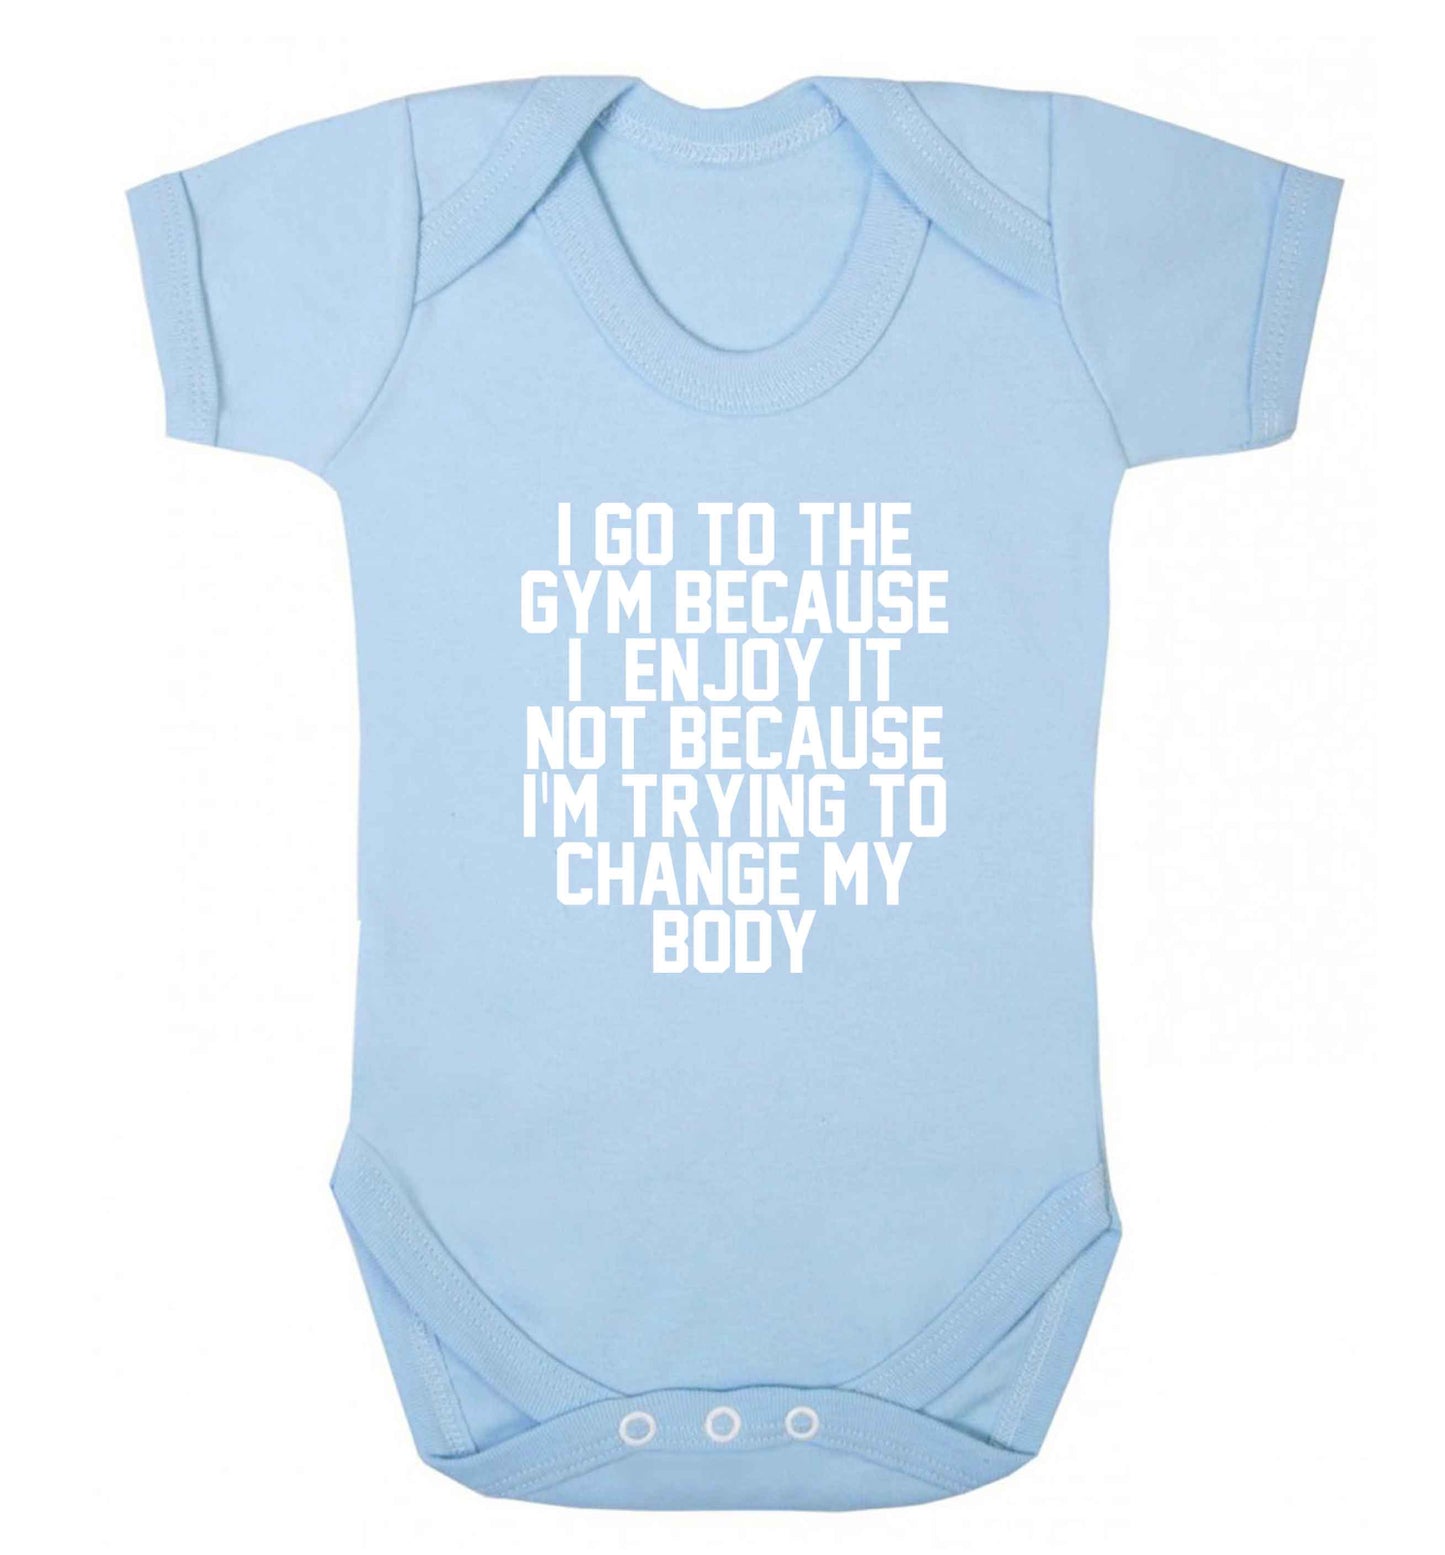 I go to the gym because I enjoy it not because I'm trying to change my body baby vest pale blue 18-24 months